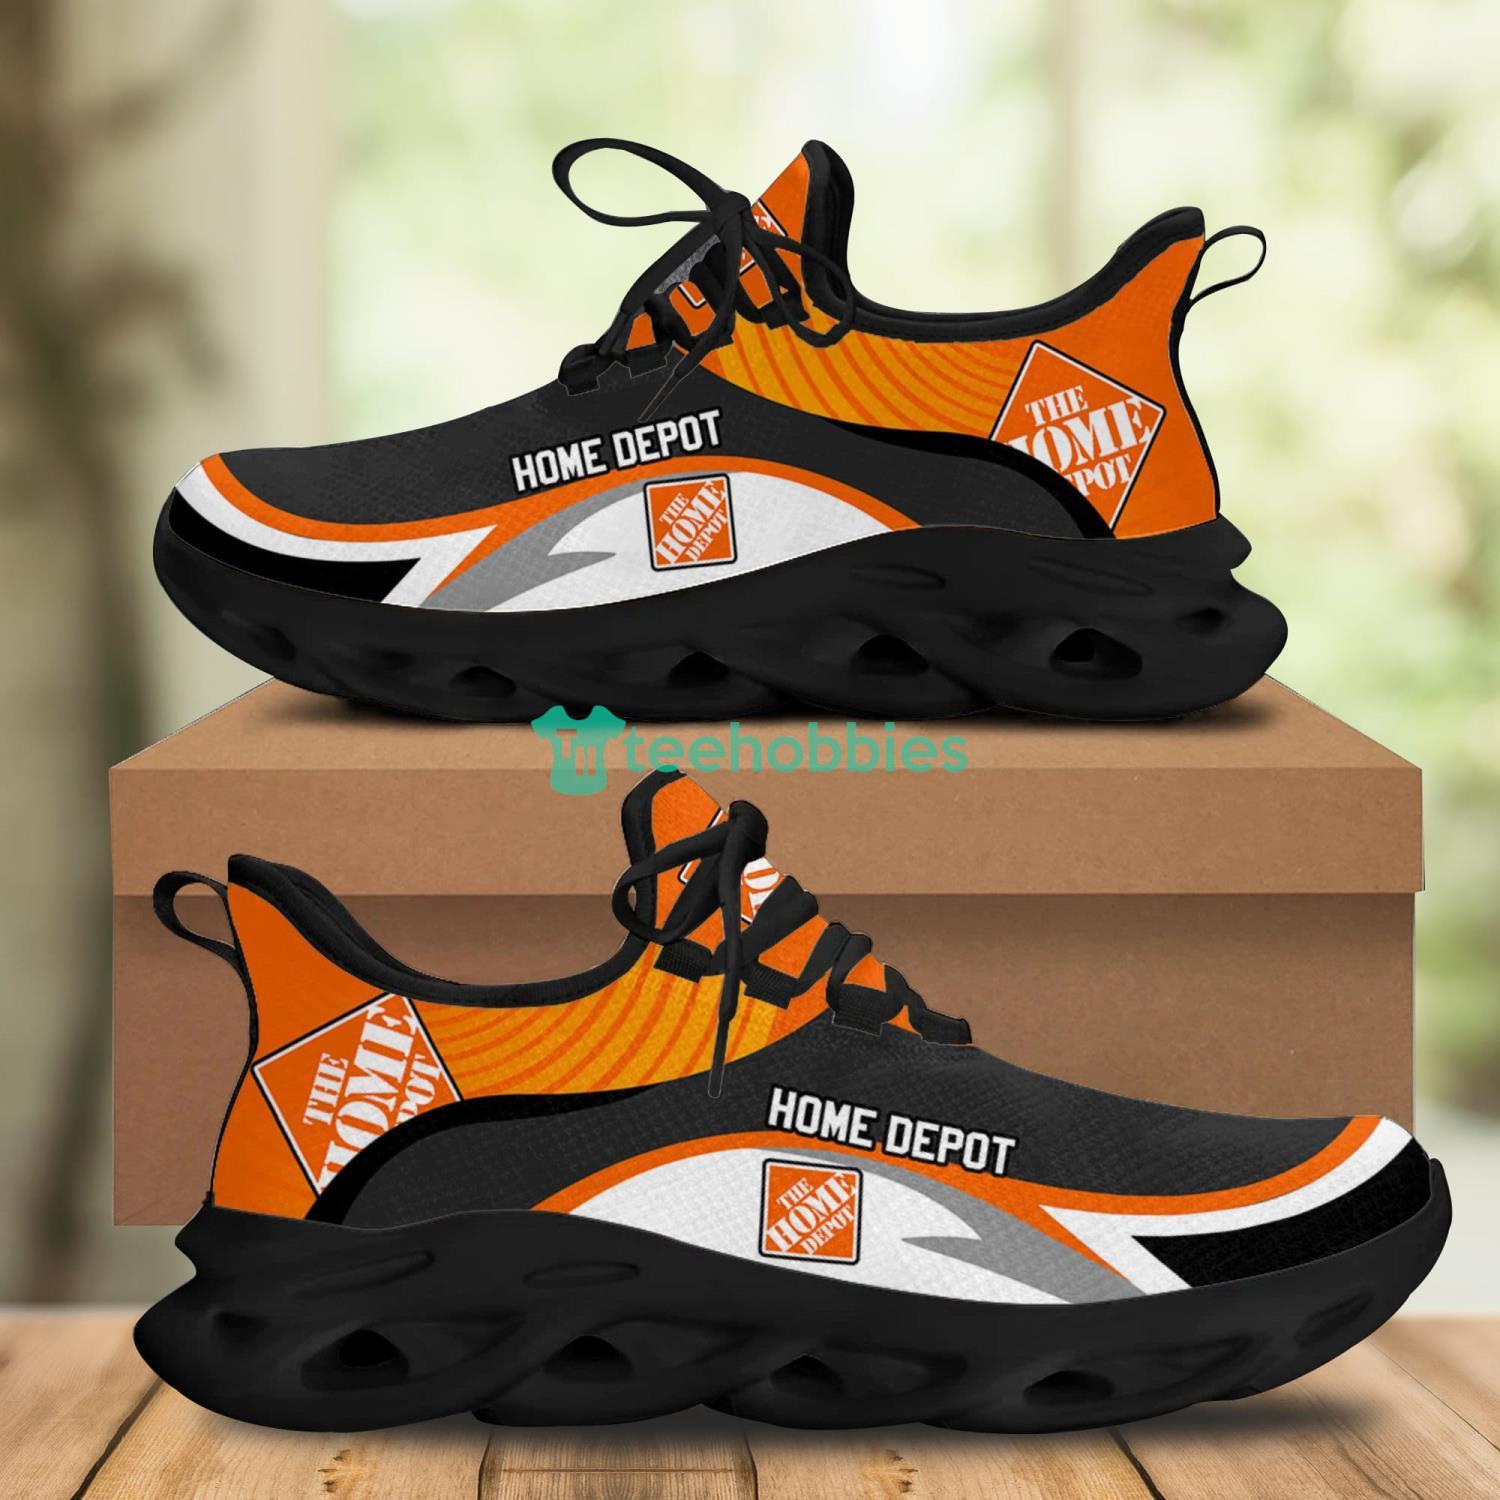 https://image.teehobbies.us/2023/04/home-depot-sneakers-shoes-men-and-women-max-soul-shoes.jpg